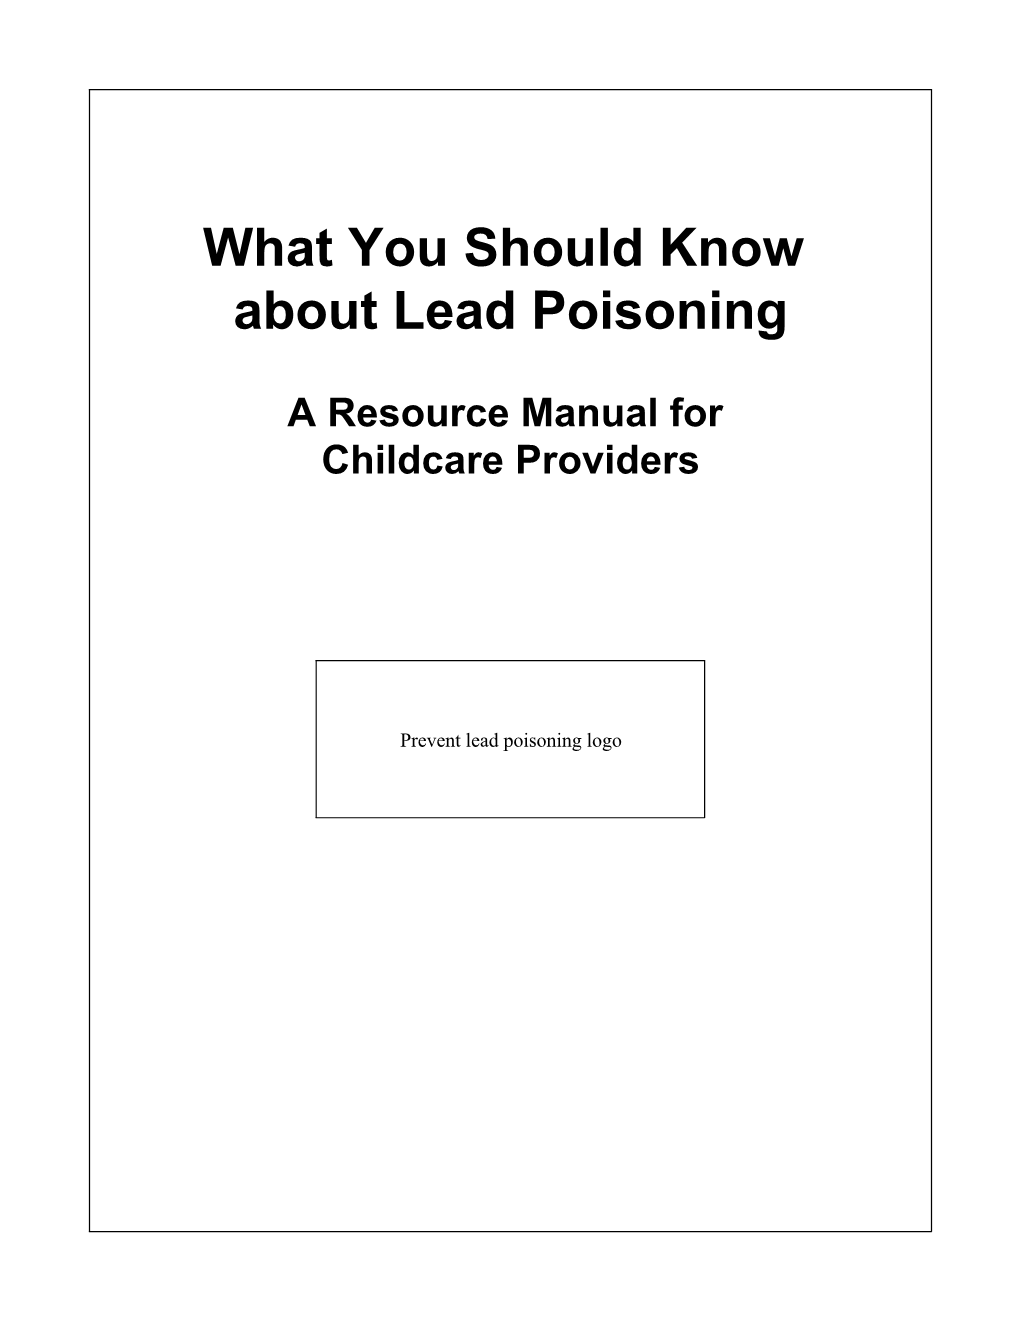 What You Should Know About Lead Poisoning